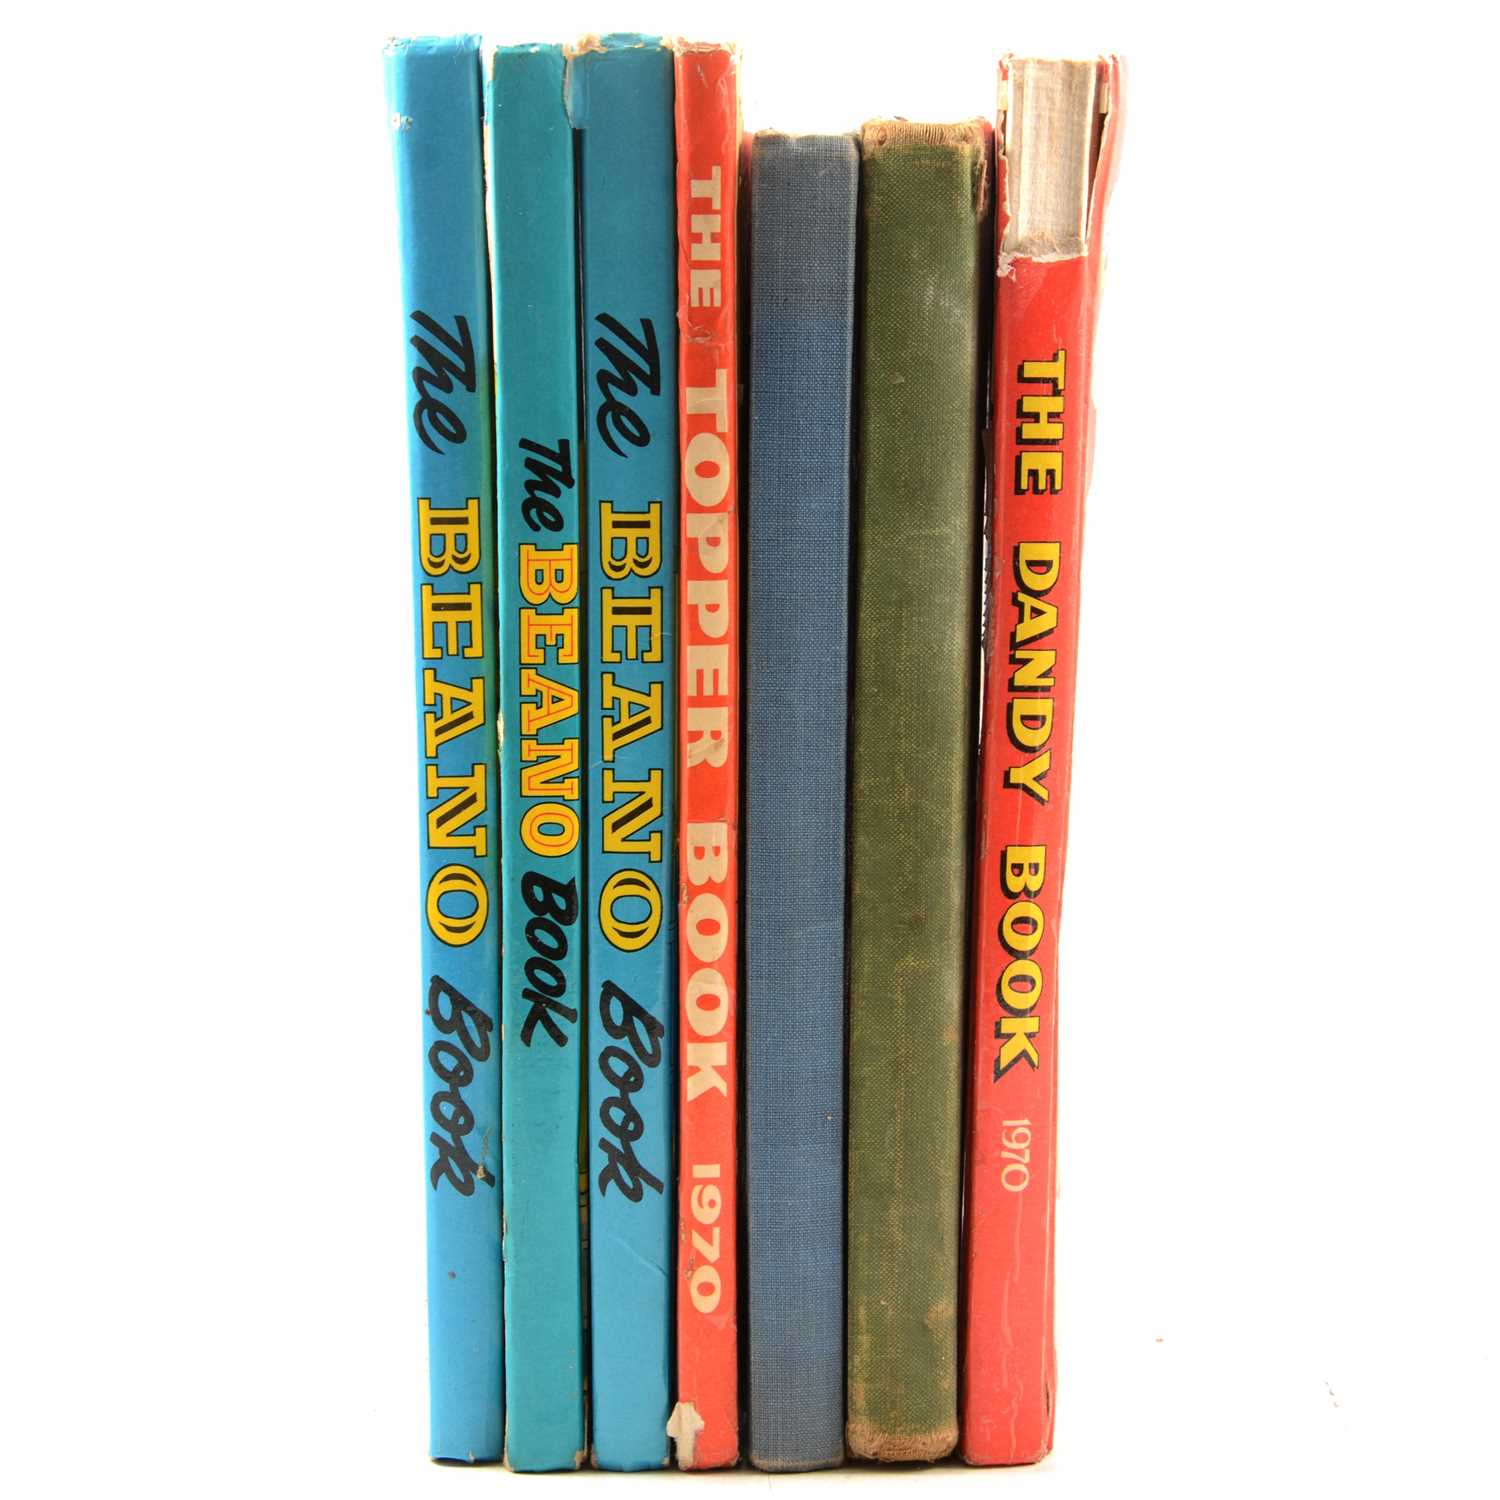 Childrens’ annuals and books,